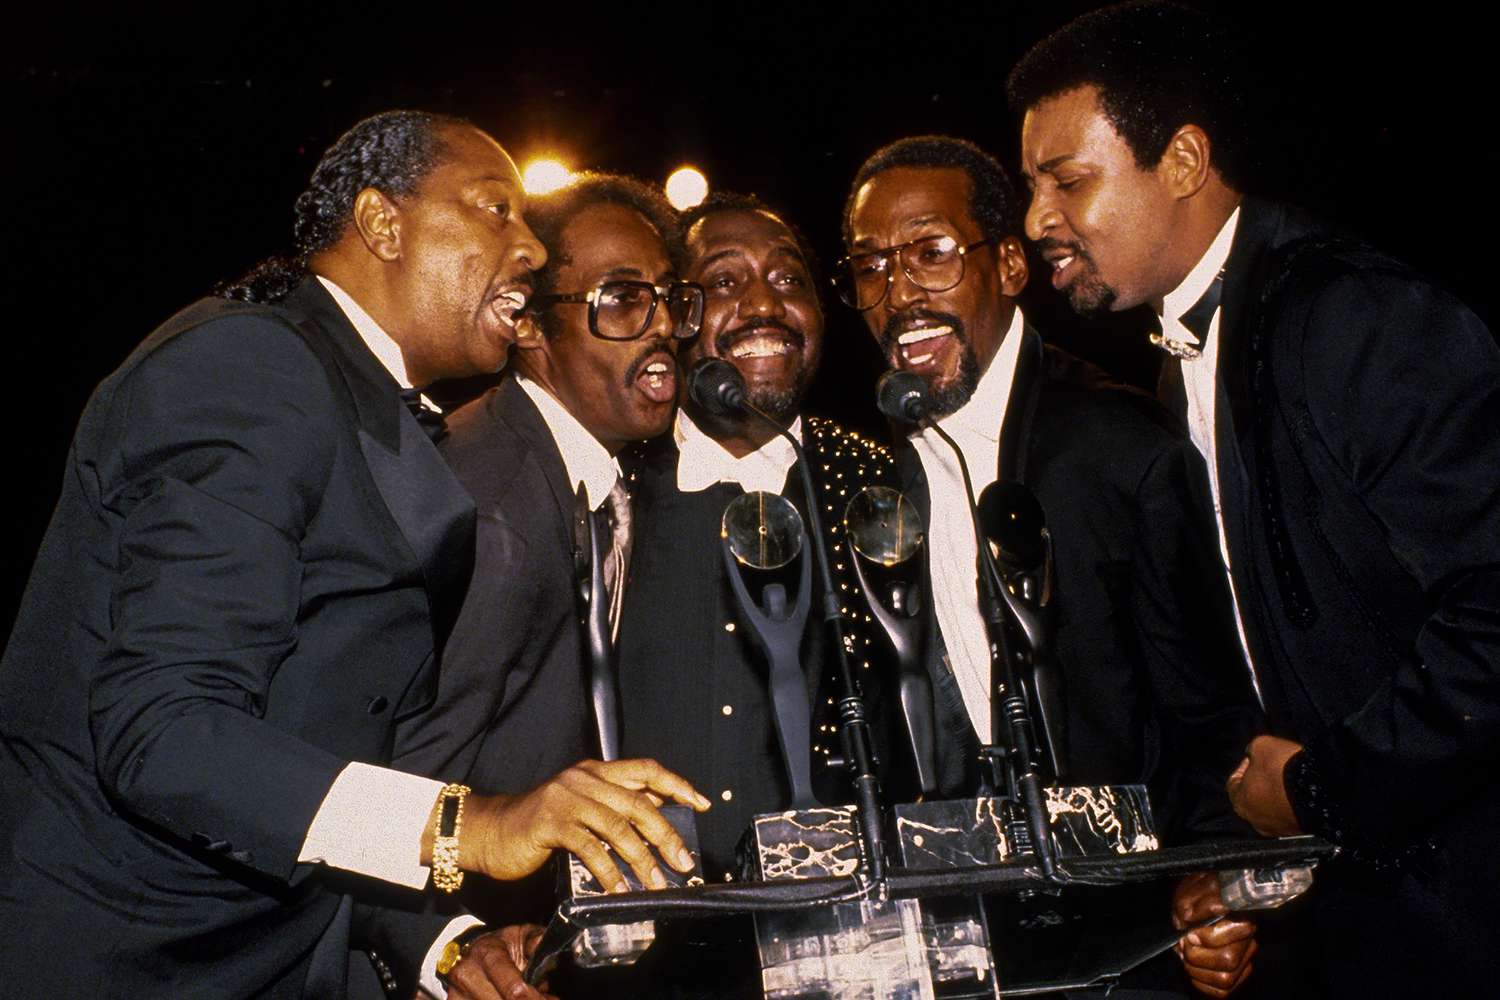 Otis Williams Details How The Temptations Made 'My Girl': 'Never Would've Imagined It Would Be That Big' (Exclusive)